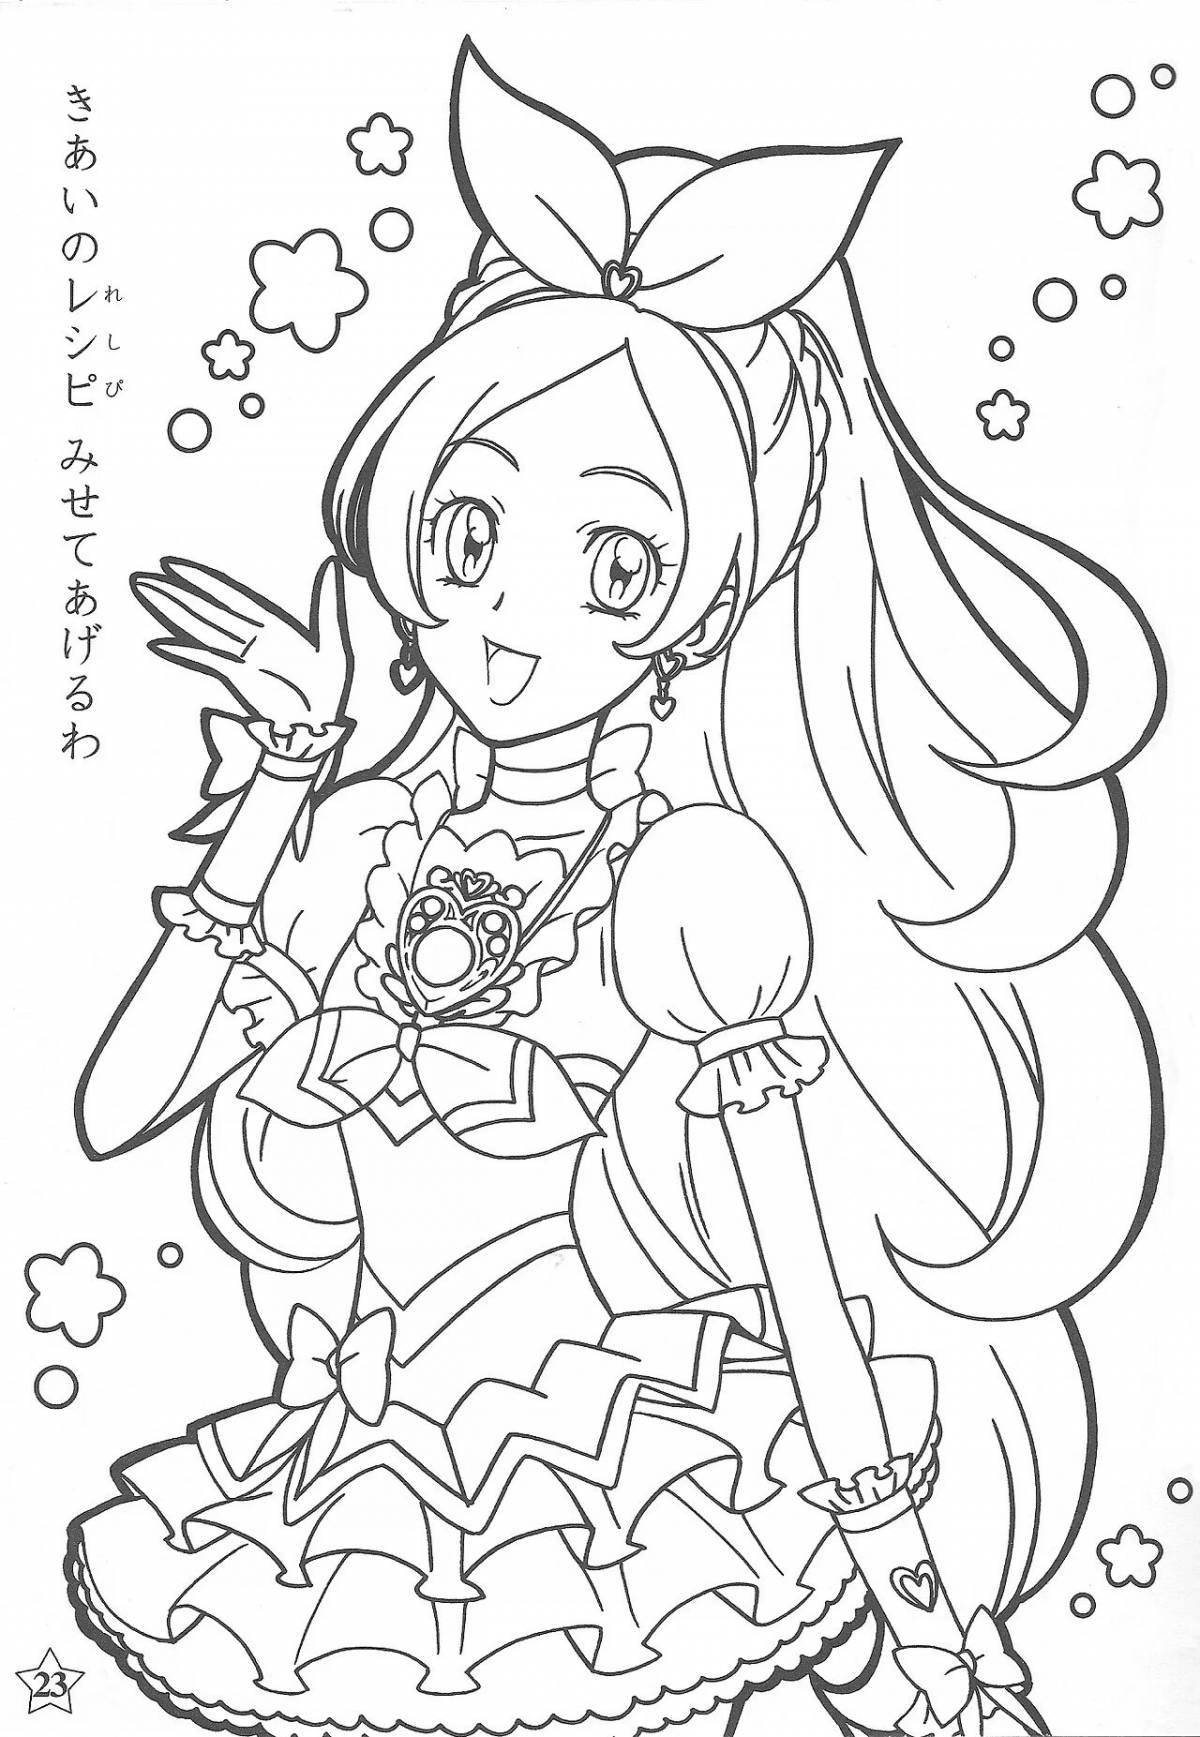 Playful precure coloring page